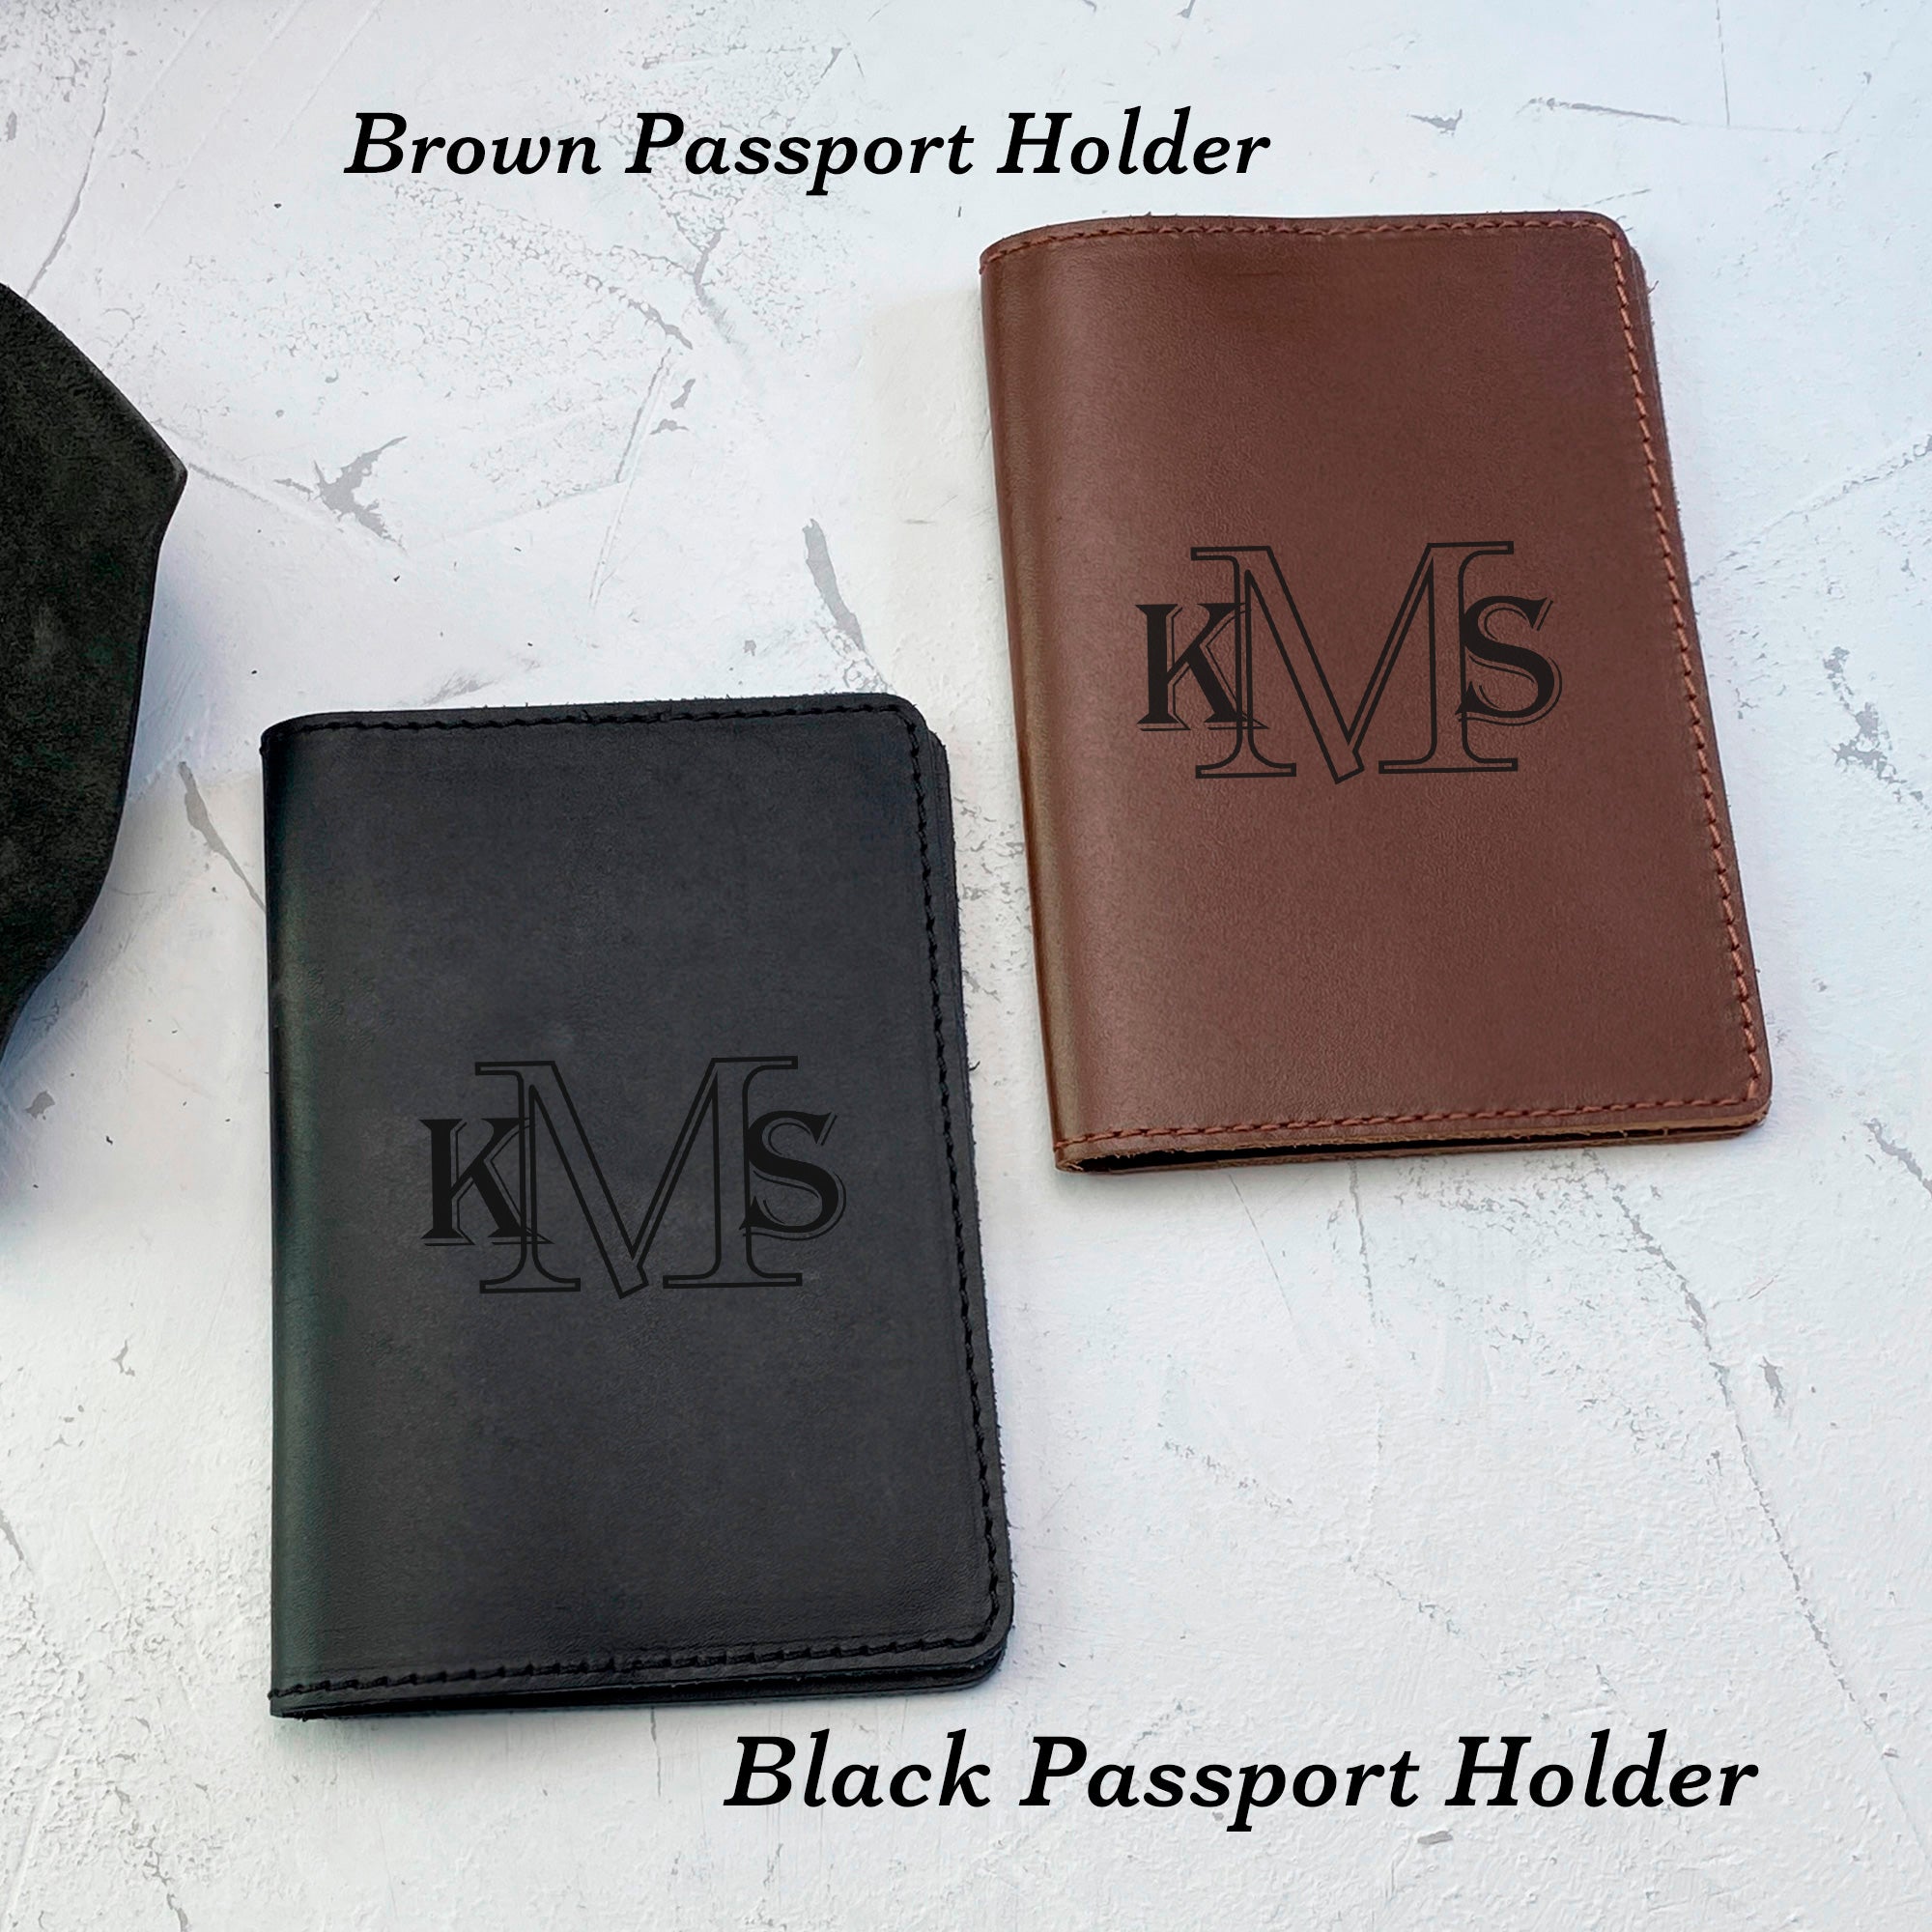 PASSPORT Leather Cover Customize Cover Name Initials Tan 